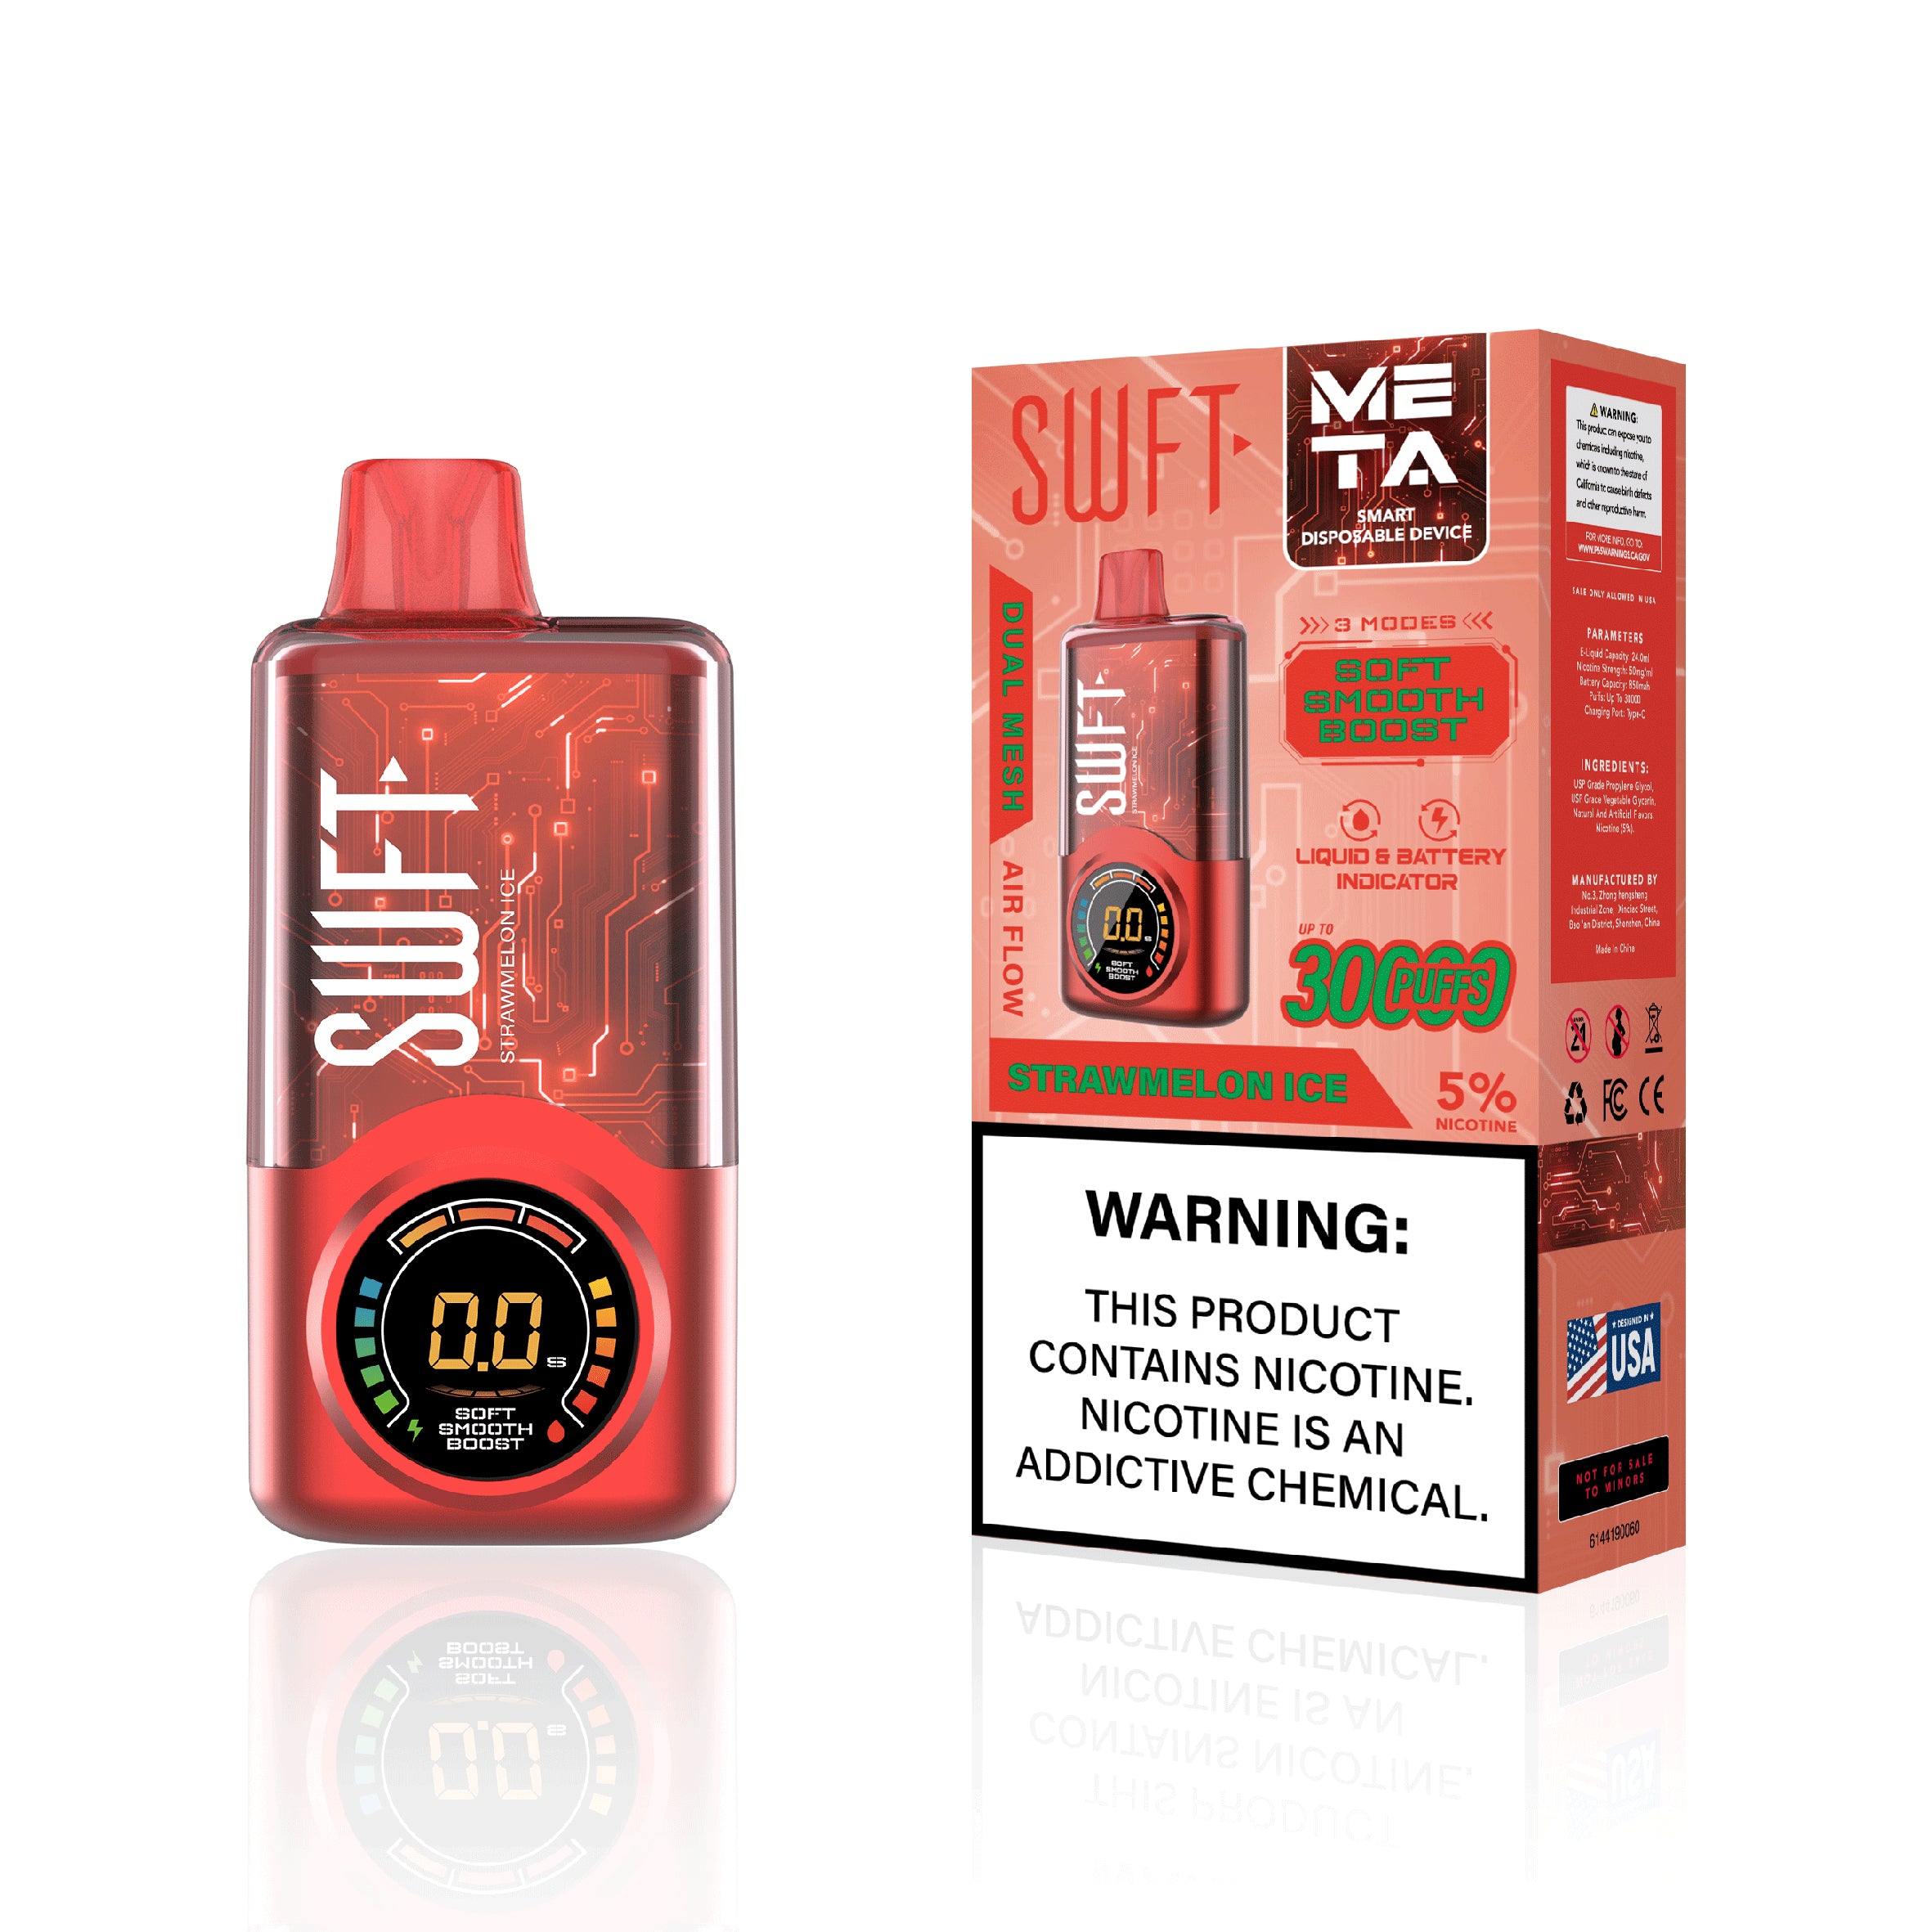 SWFT META 30000 PUFFS ADJUSTABLE WATTAGE DISPOSABLE VAPE DEVICE DUAL MESH COIL LIQUID AND BATTERY INDICATOR STRAWMELON ICE